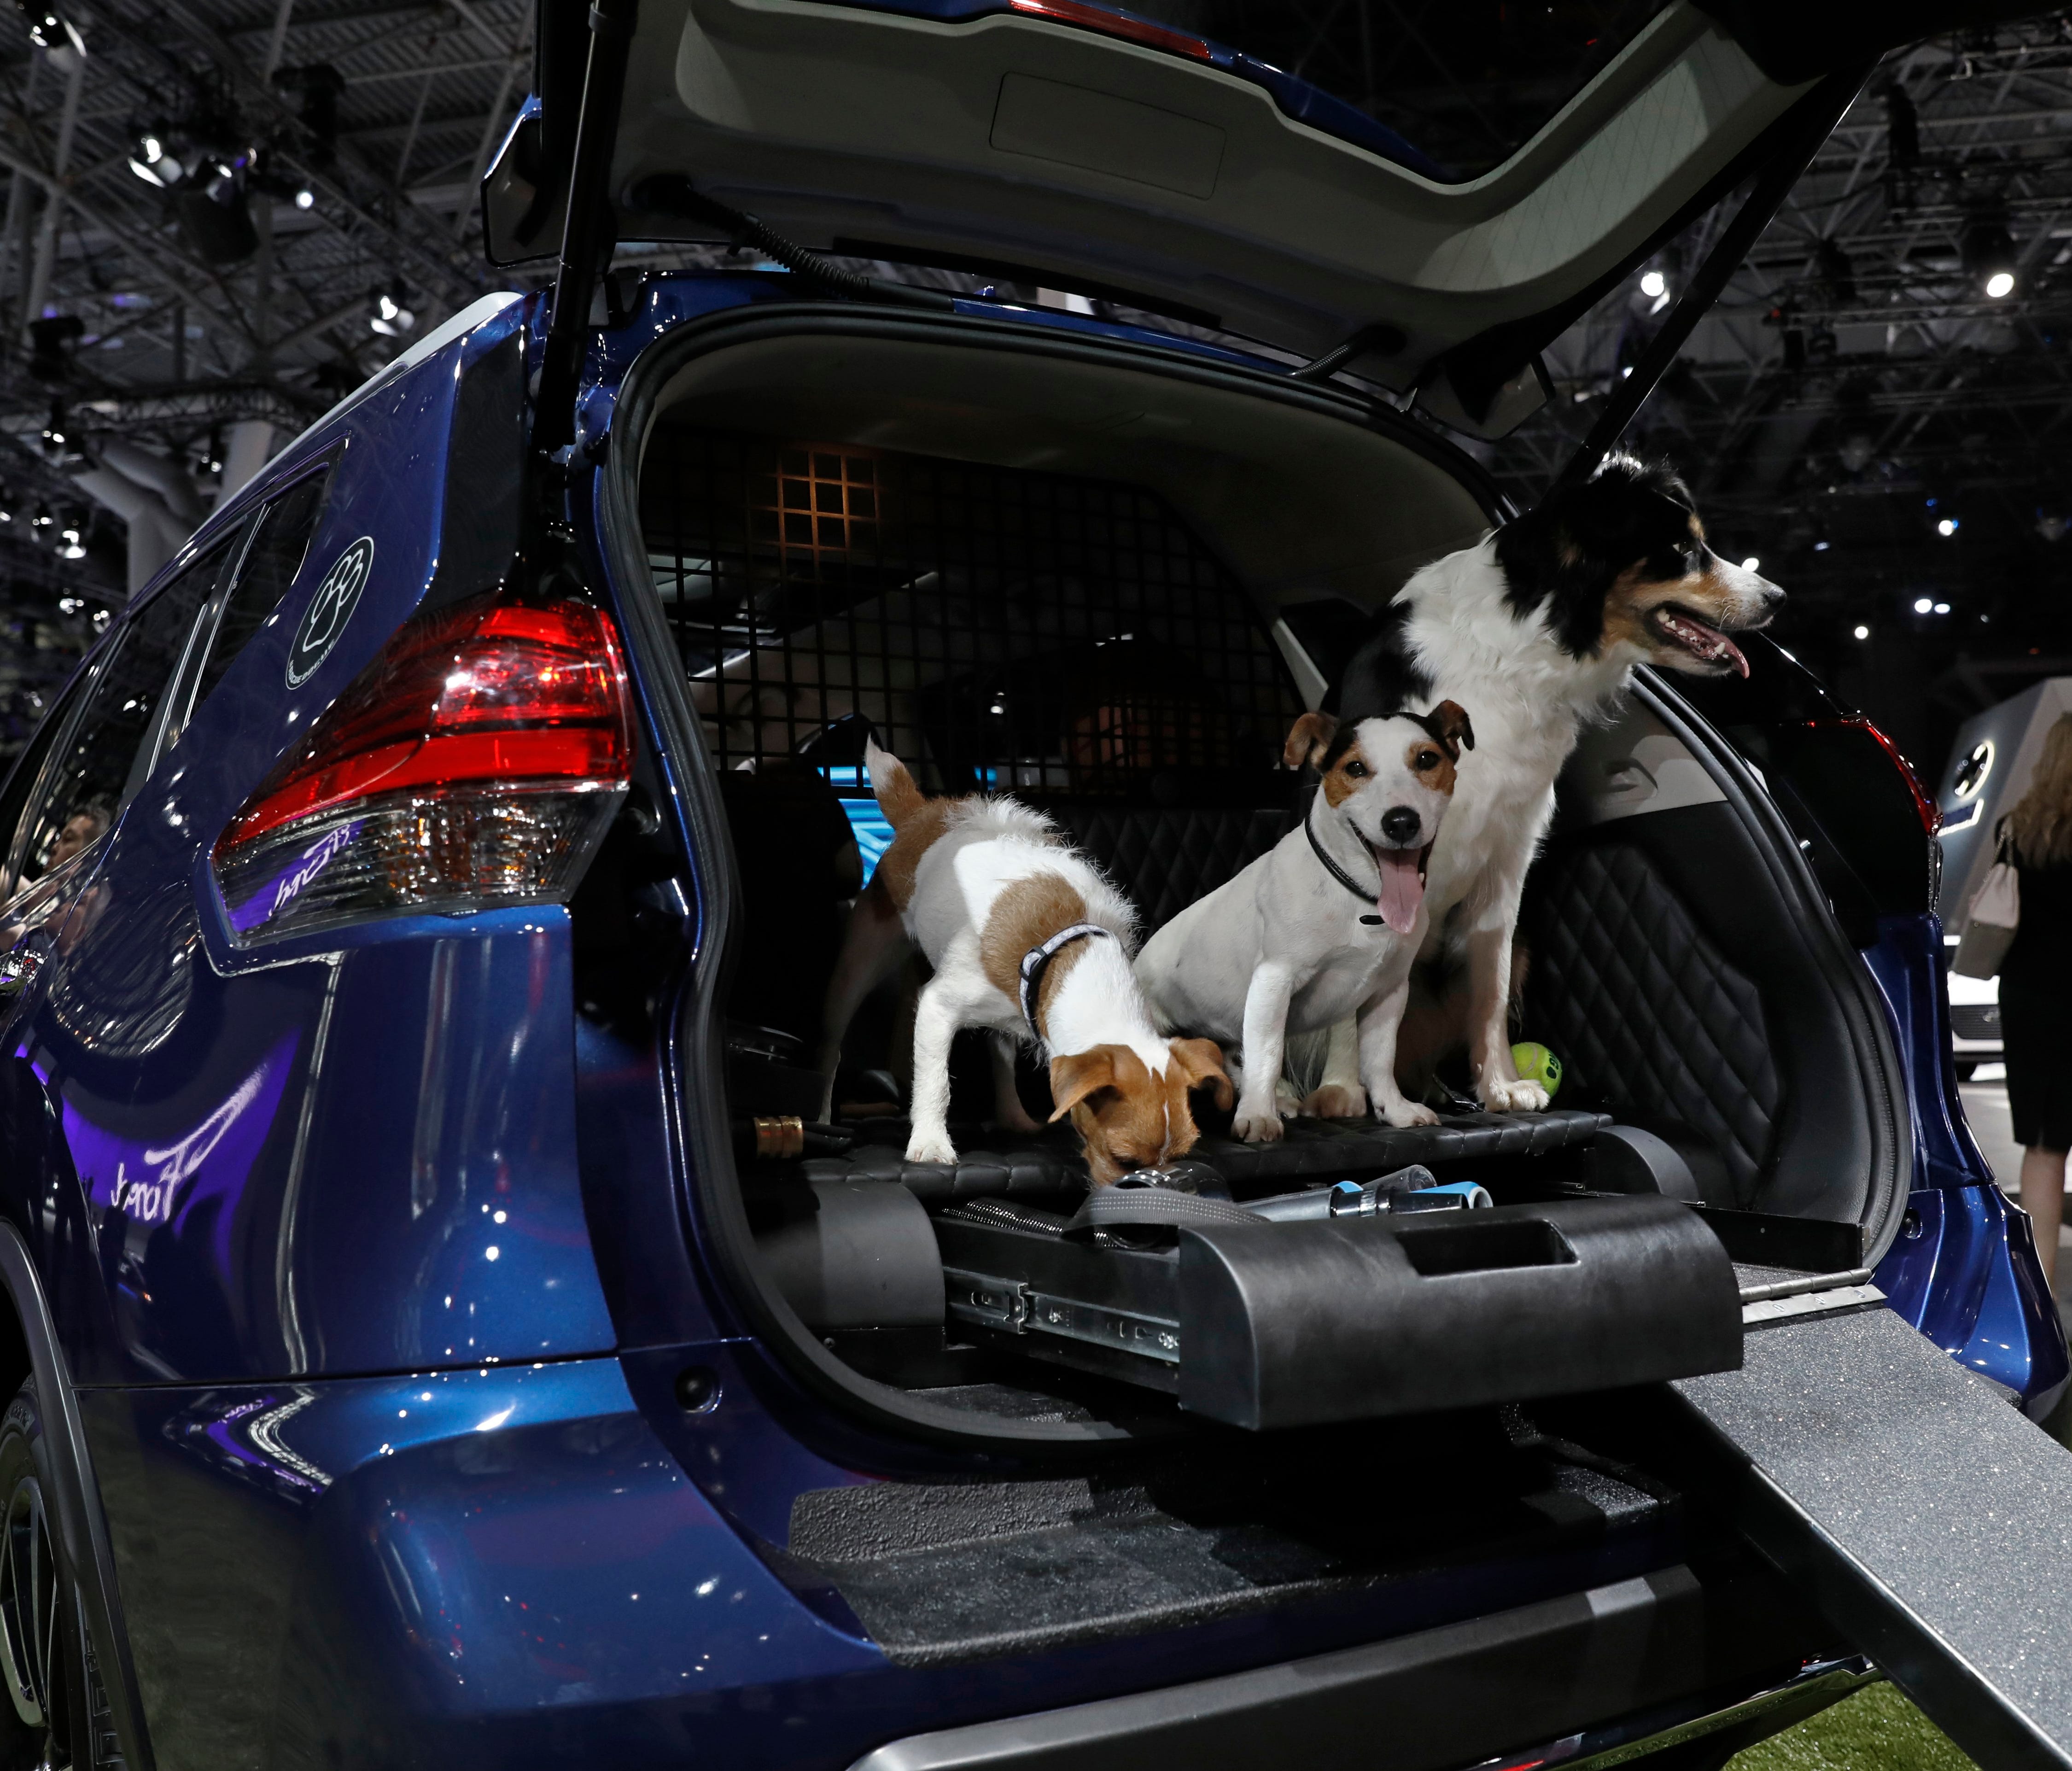 A border collie, left, and two Jack Russell terriers occupy the rear compartment of the Nissan 